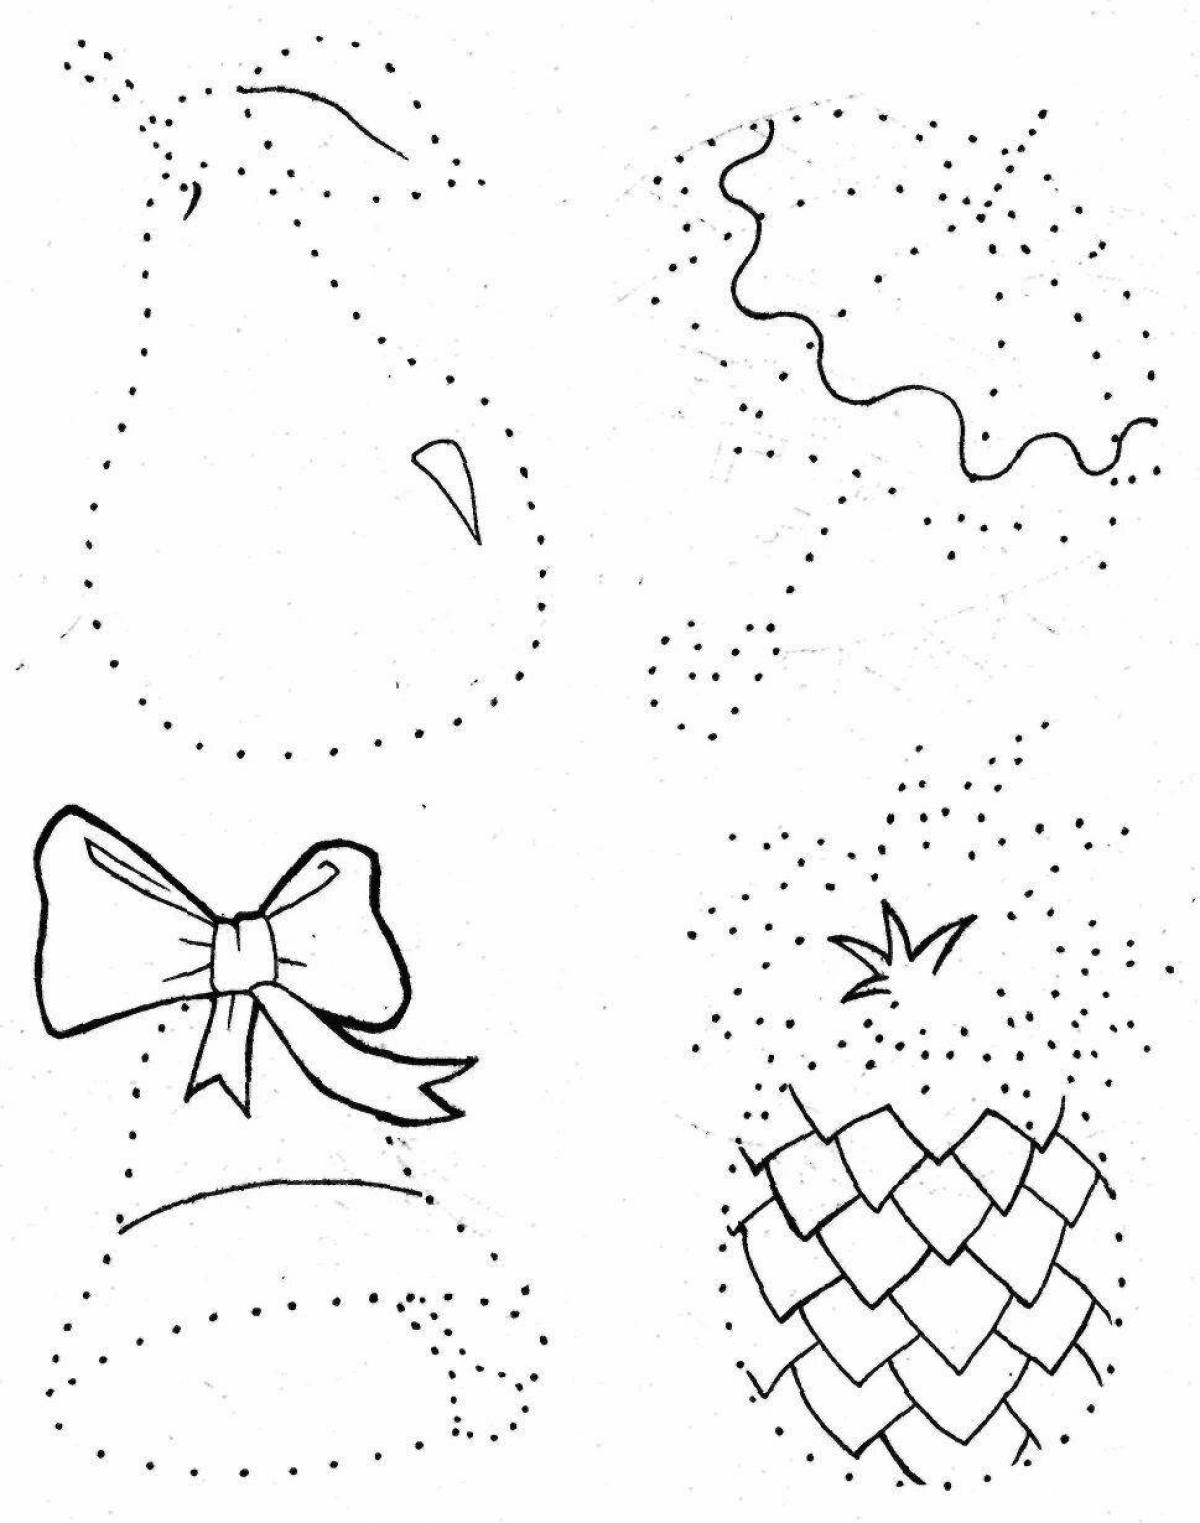 Fascinating coloring with dots for kids